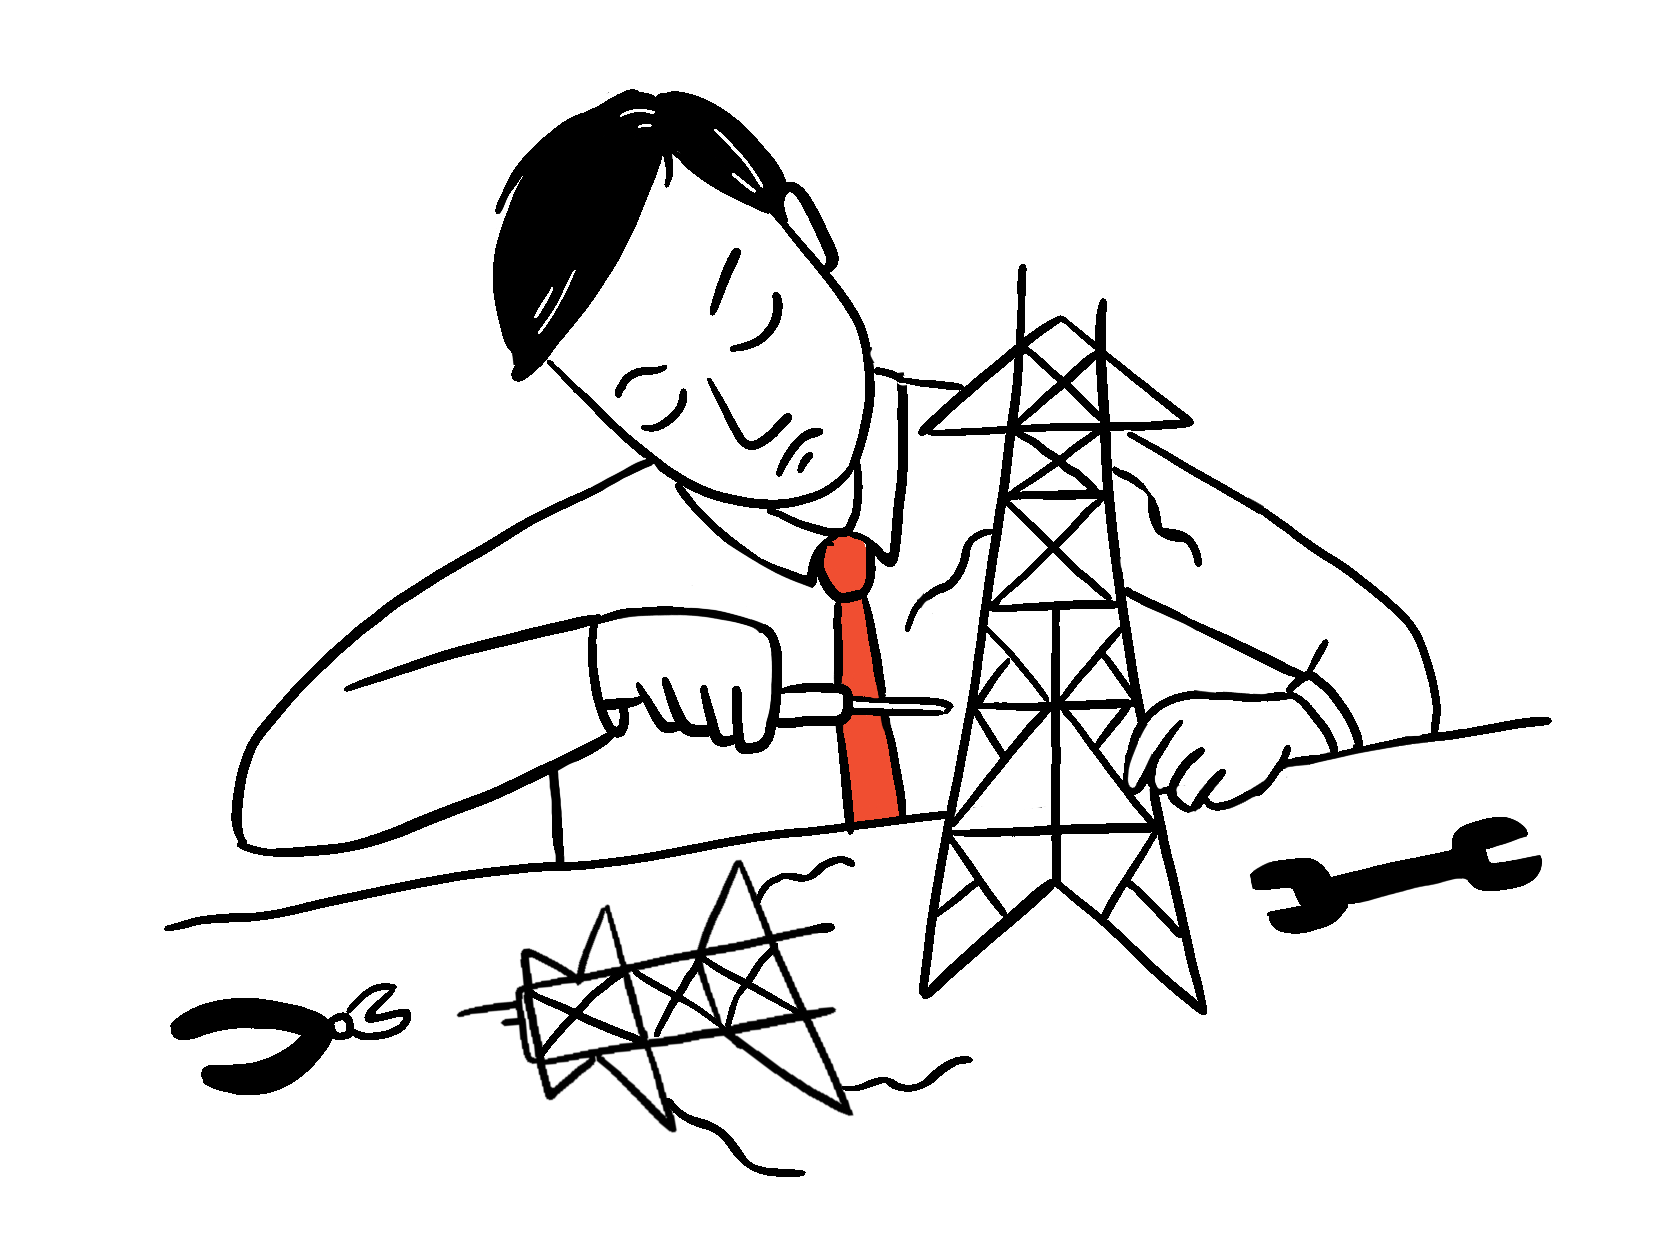 An animation of a cartoon person in a suit and dress shirt tinkers with electricity pylons, using a screwdriver with a wrench and pliers nearby.